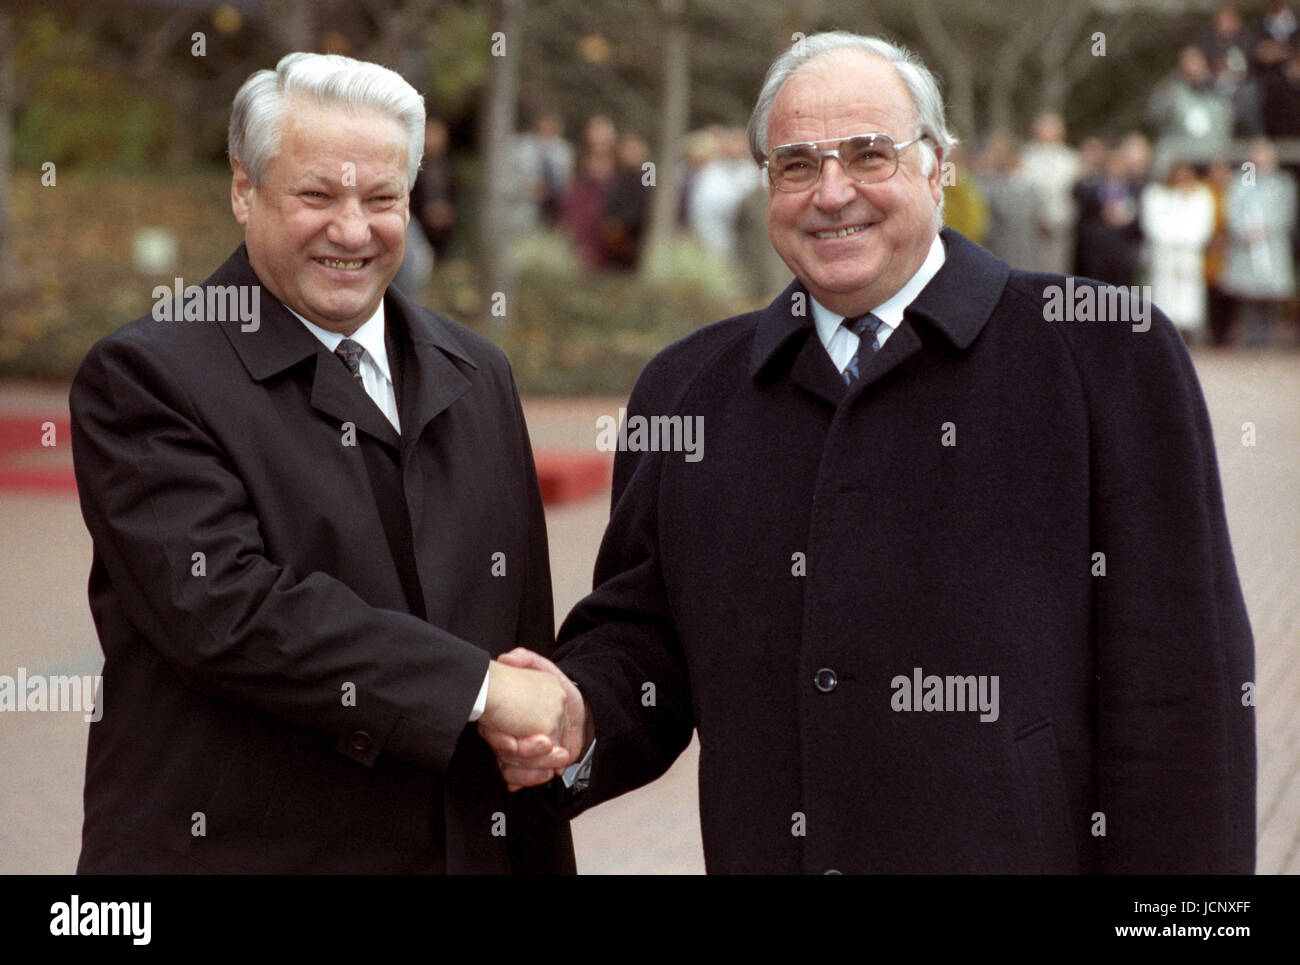 Russian president Boris Jelzin (l) is welcomed by German chancellor Helmut Kohl (r) on 21 November 1991 in front of the Federal Chancellery in Bonn. Stock Photo